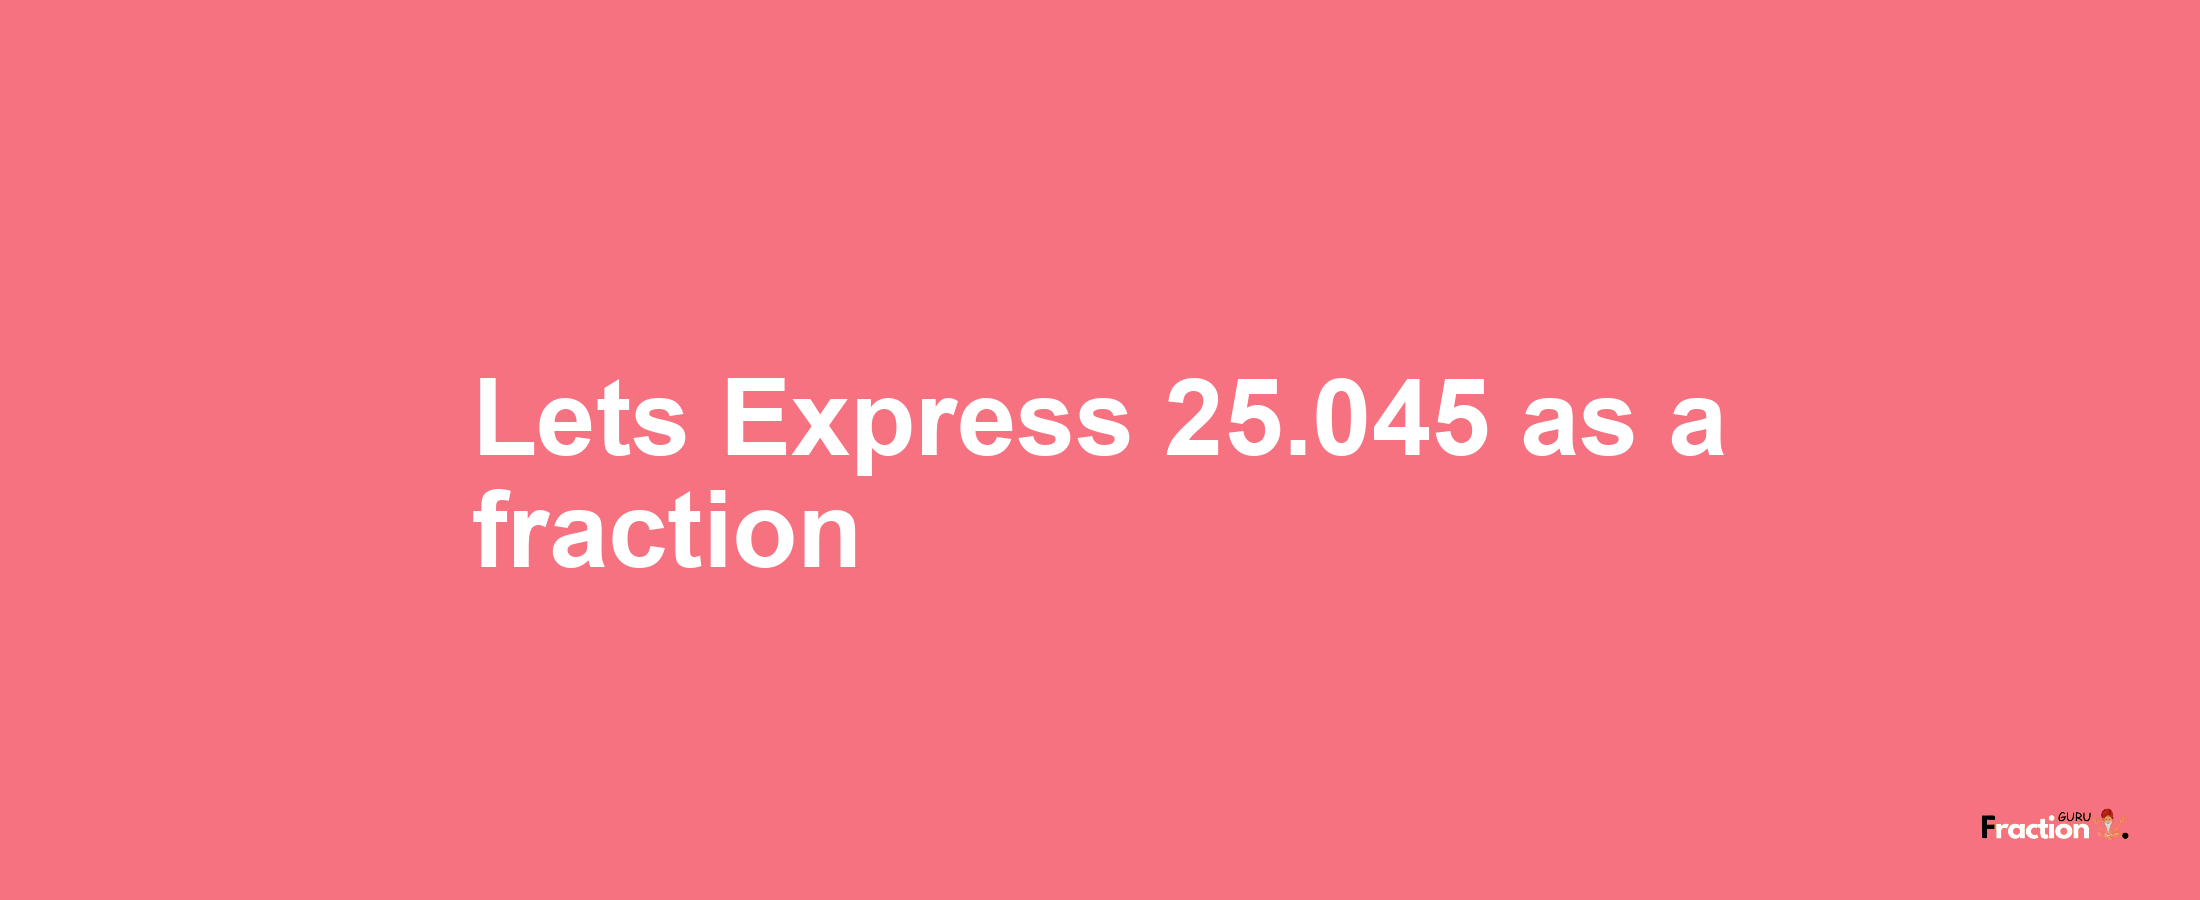 Lets Express 25.045 as afraction